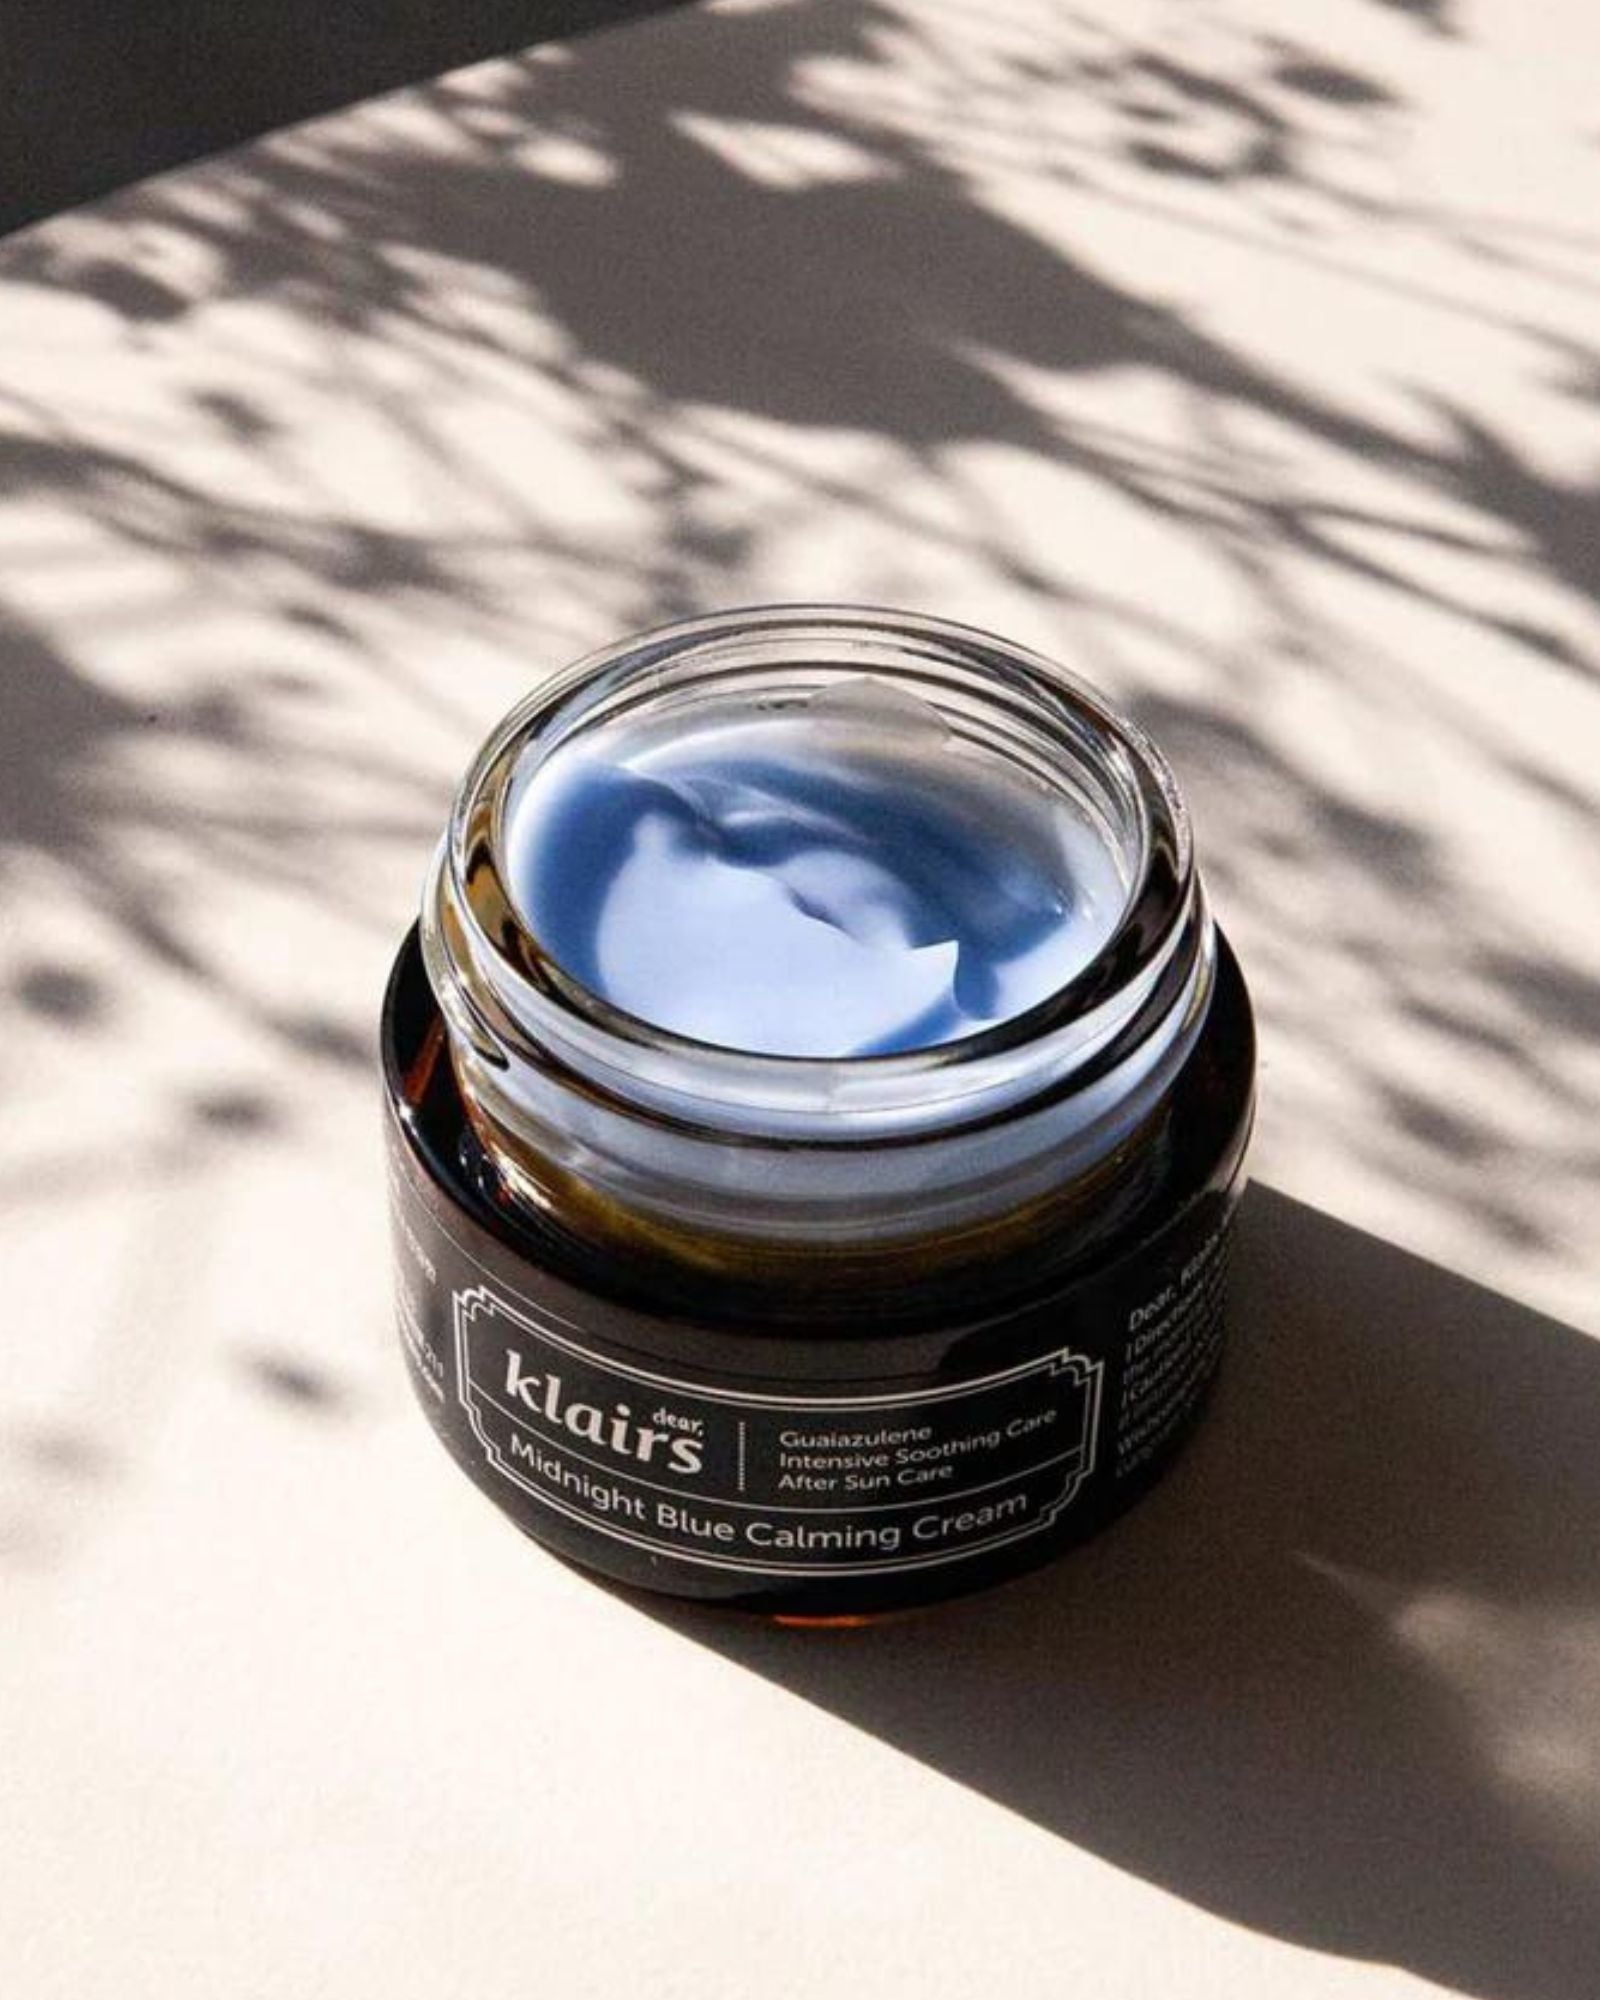 A pick-me-up for bad skin days - A review of Klairs' Midnight Blue Calming Cream